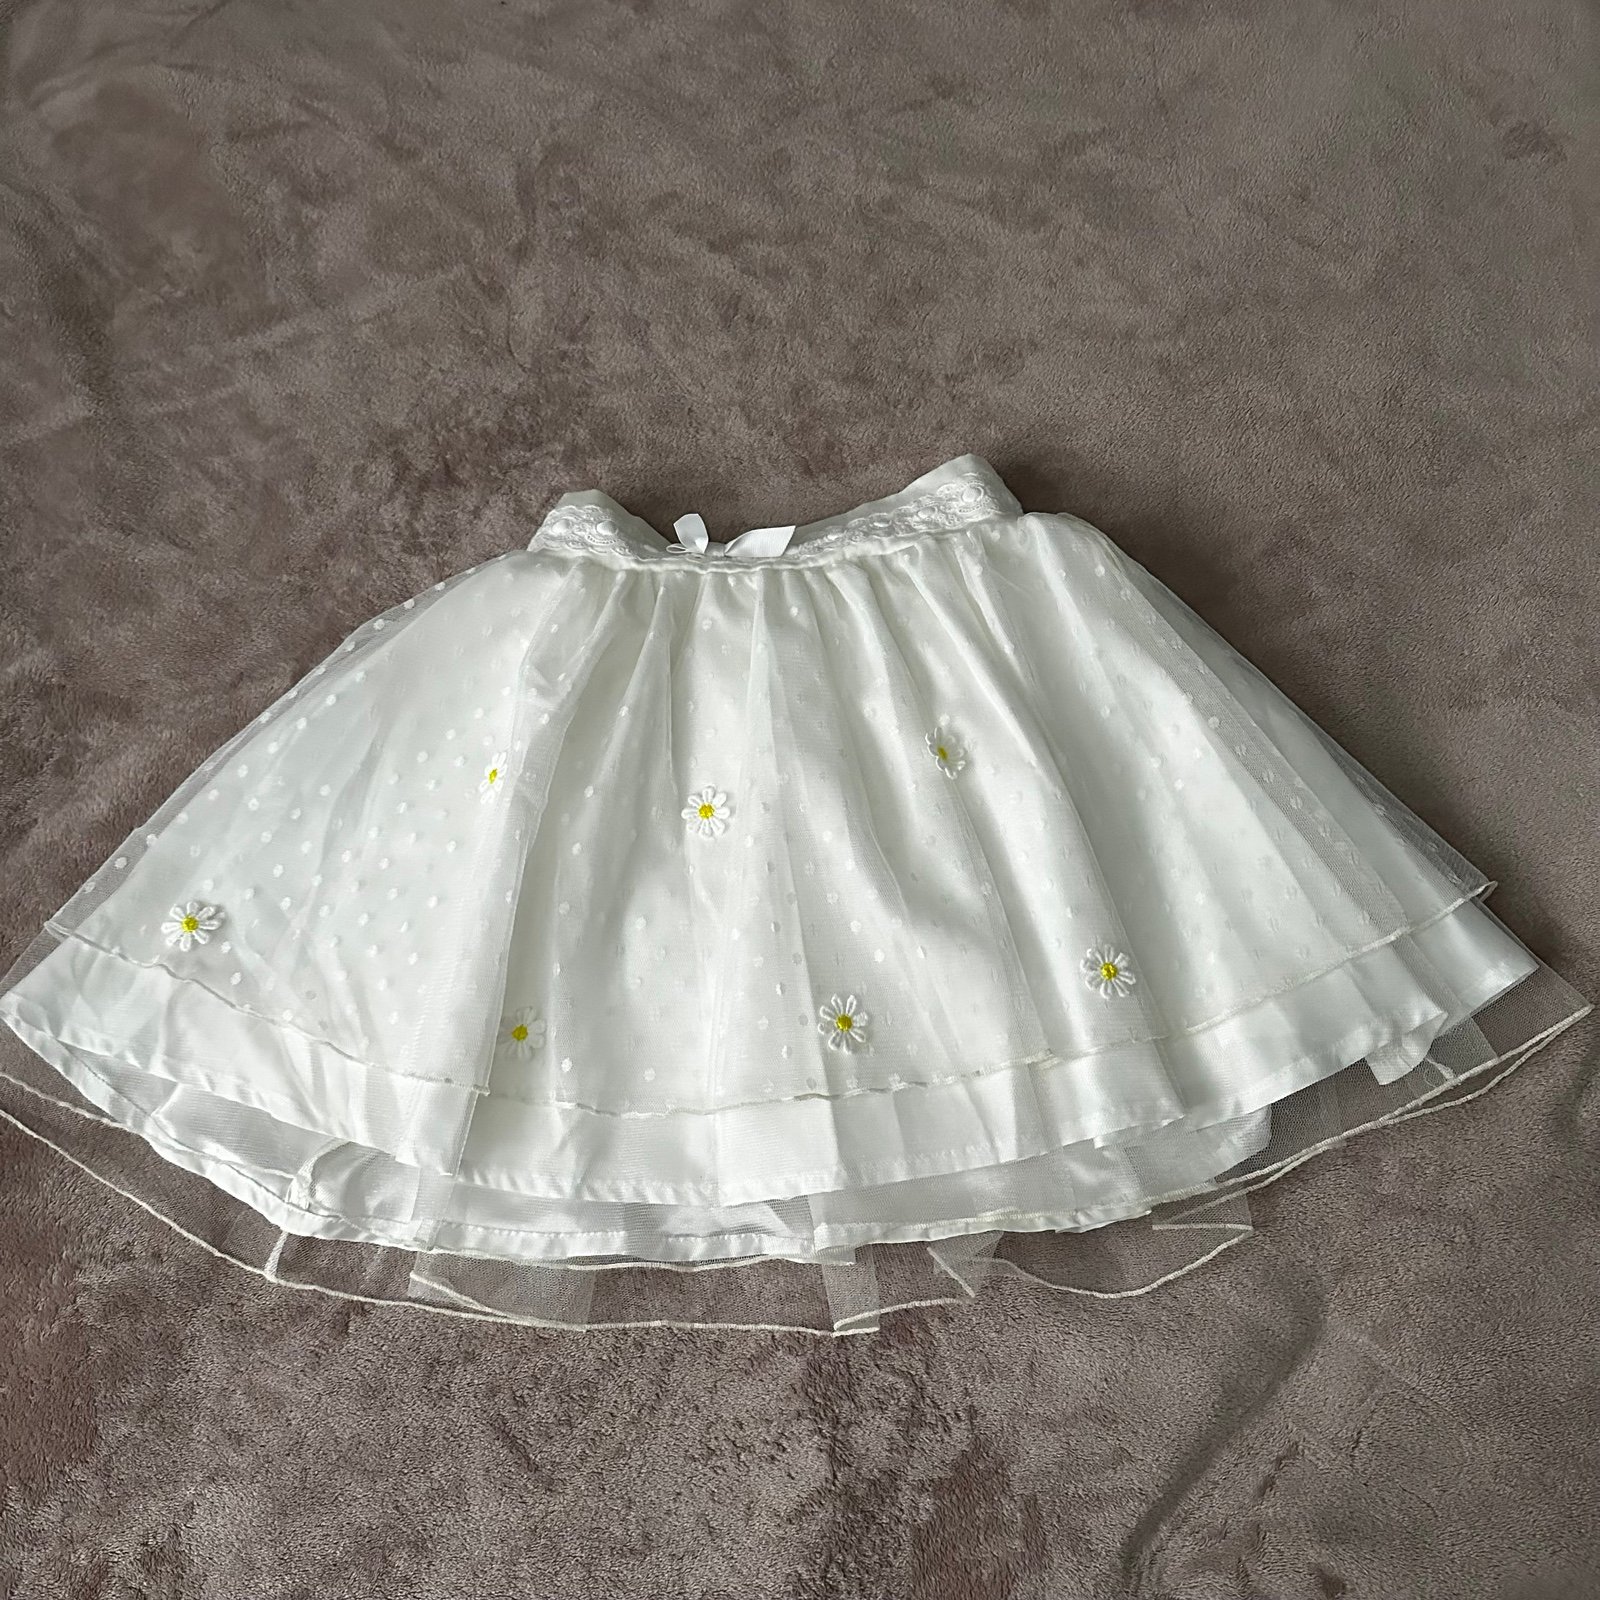 Authentic Liz Lisa White Daisy Tulle Skirt hmFzKgBo4 just for you